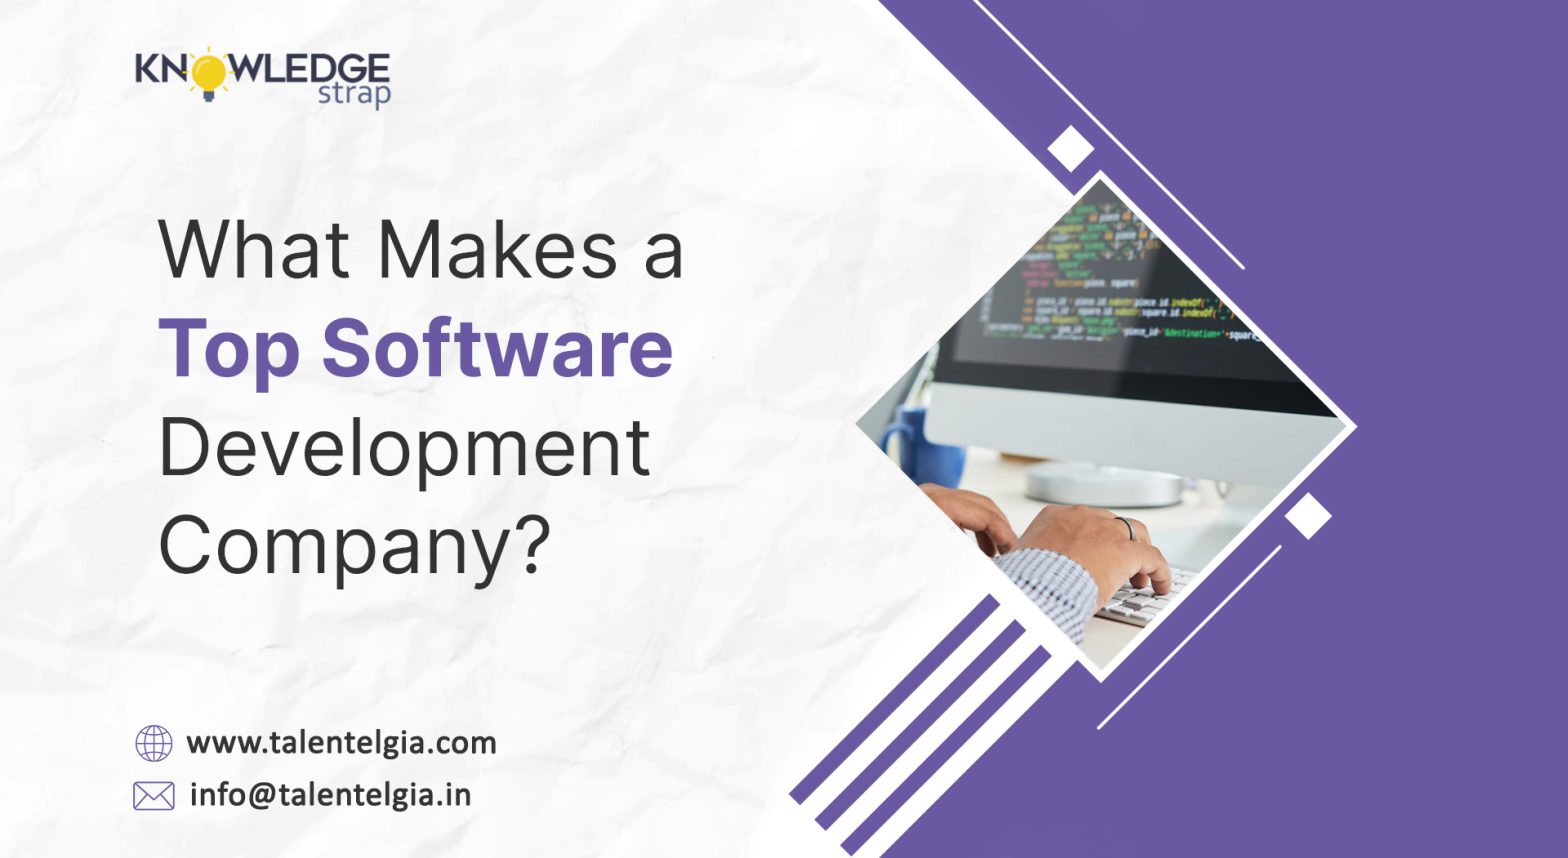 What Makes a Top Software Development Company